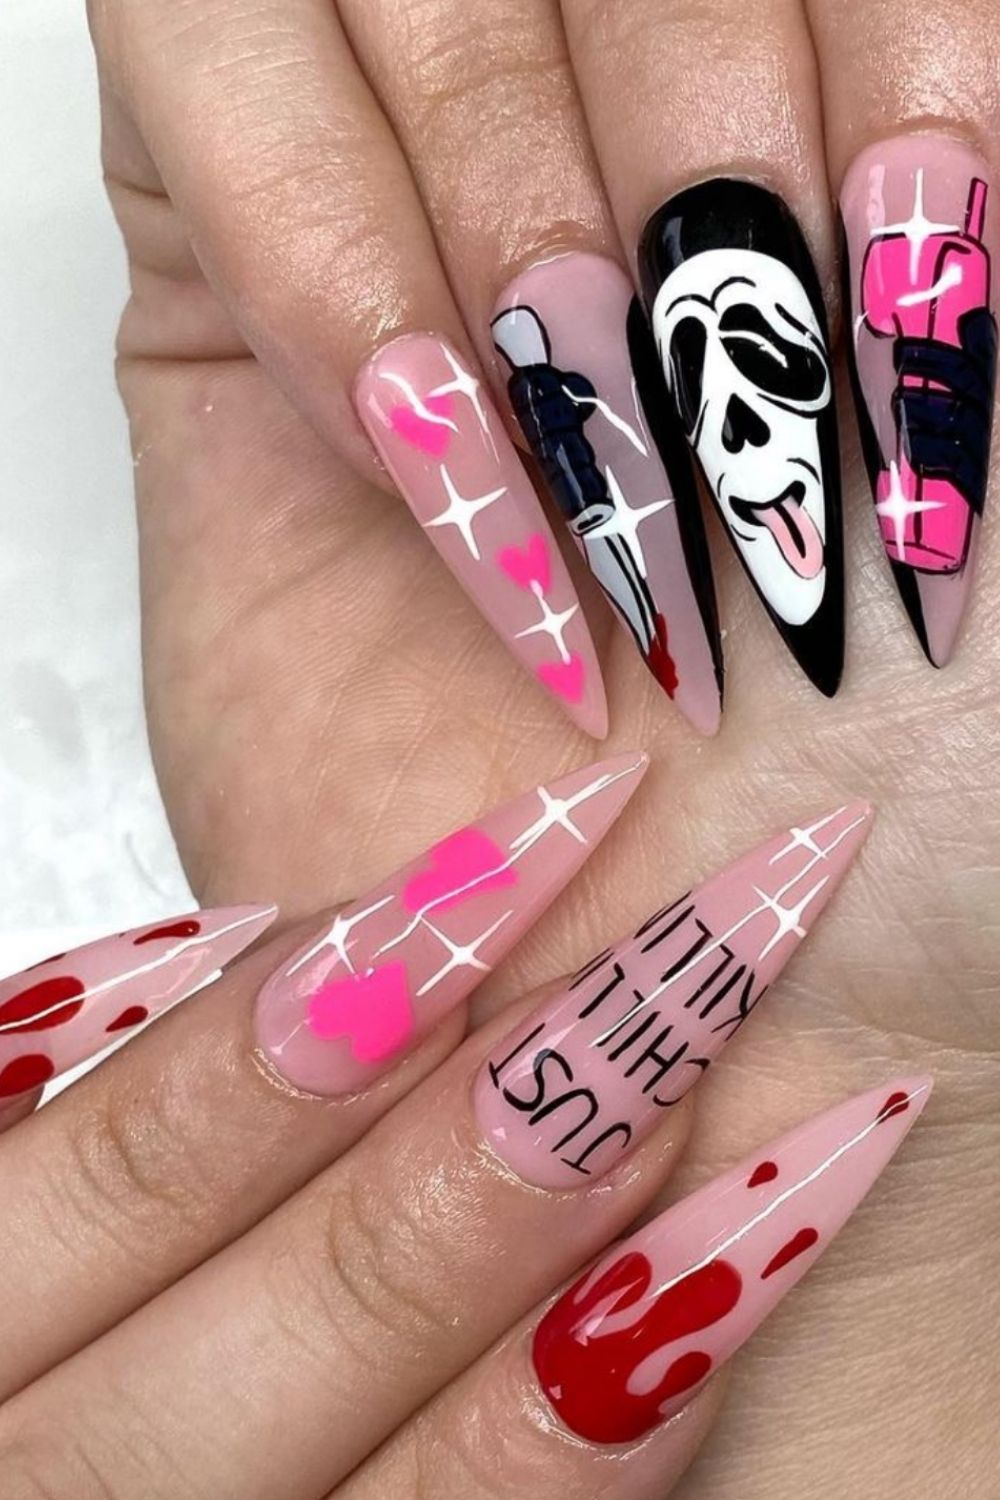 34 Amazing Halloween Nail Art Designs For 2021
